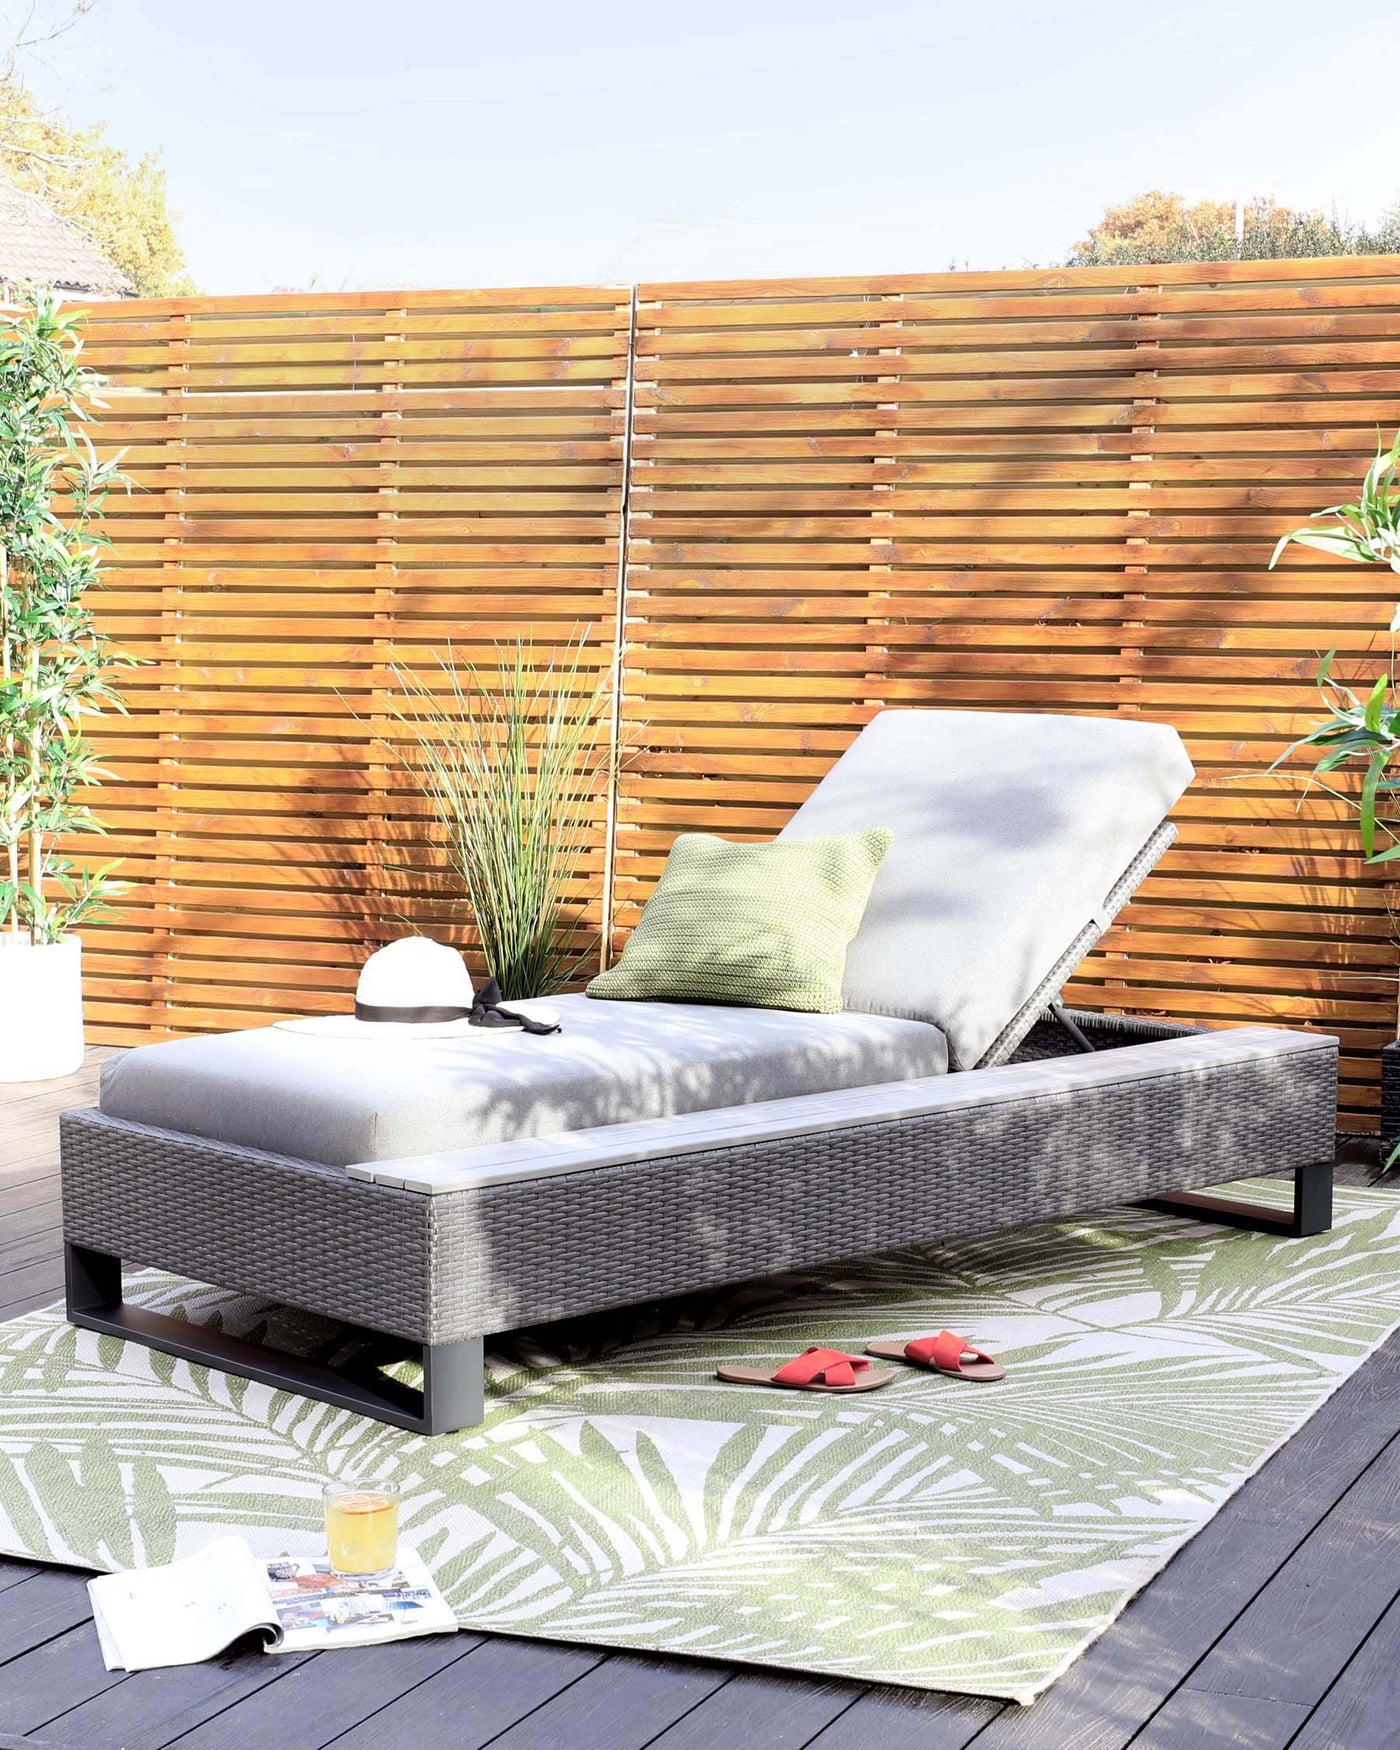 Outdoor chaise lounge with a grey wicker frame, adjustable backrest, and thick cushion atop a green and white patterned area rug on a wooden deck.